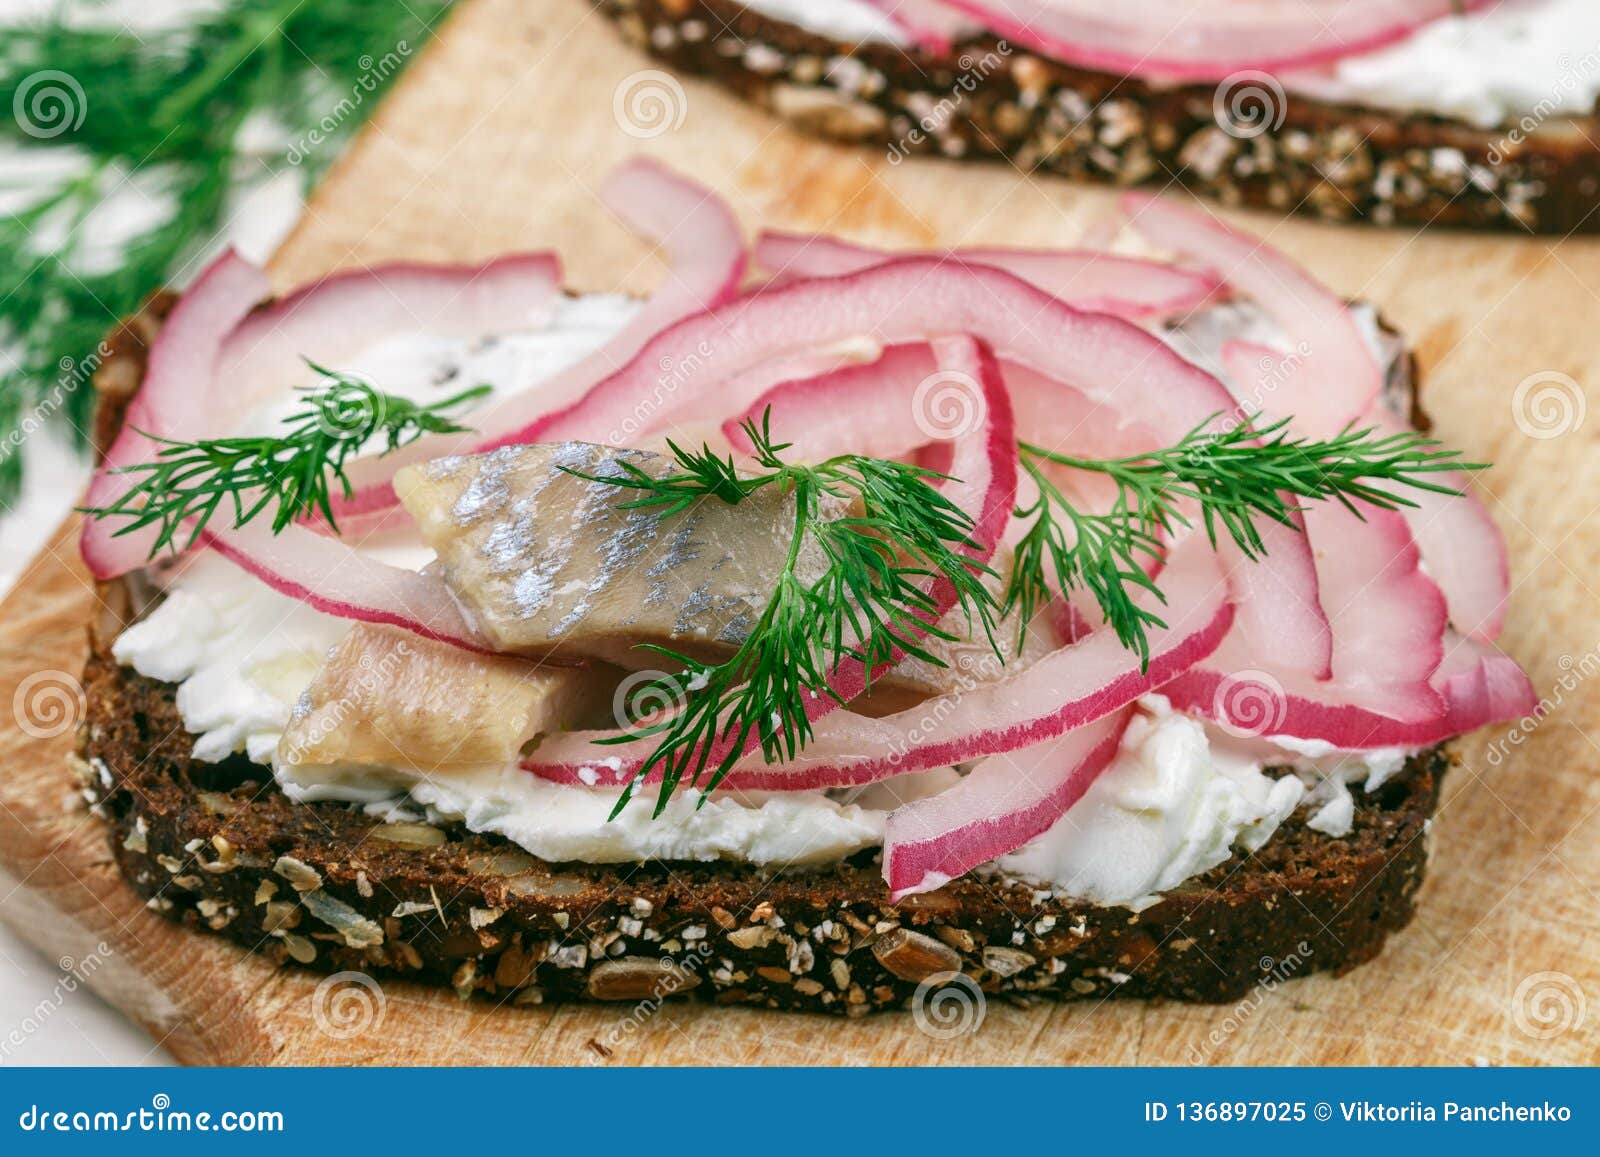 Open Sandwich With Salted Fish Herring Mackerel Cottage Cheese